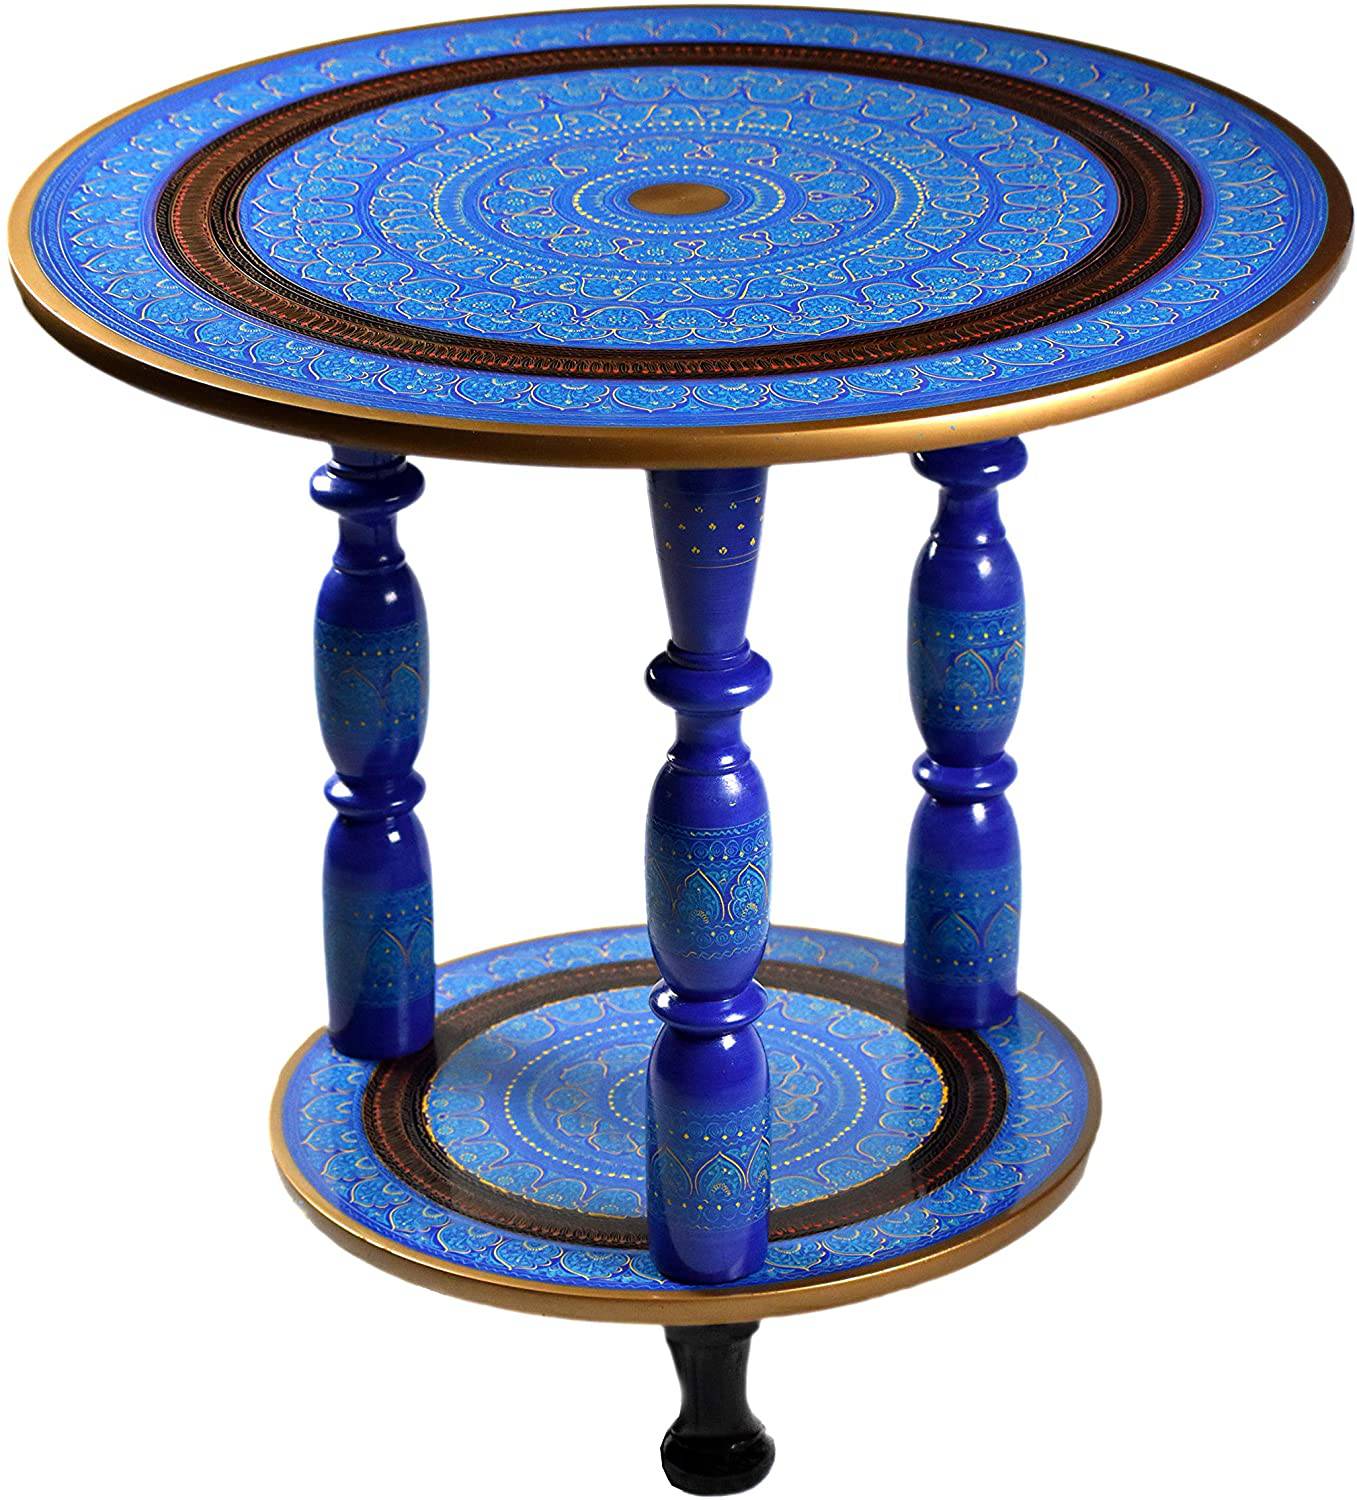 Hand-Crafted Table  - Lacquer Art Table (Teal) - Intense oud